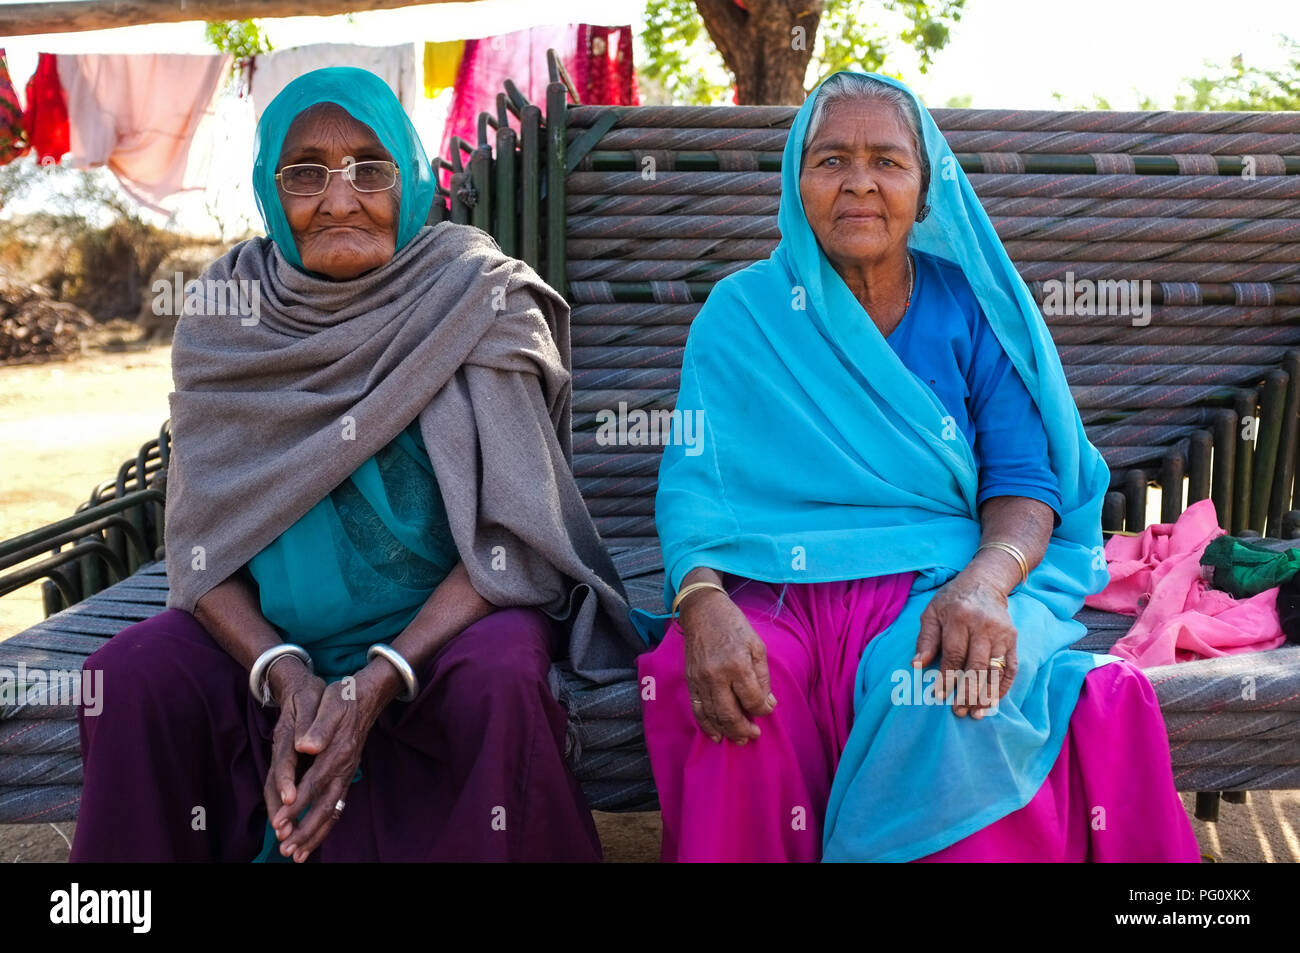 HAMPI, INDIA - FEBRUARY 14, 2015: Two elderly Indian women dressed in traditional clothes and head scarf sitting on stacked benches. Stock Photo